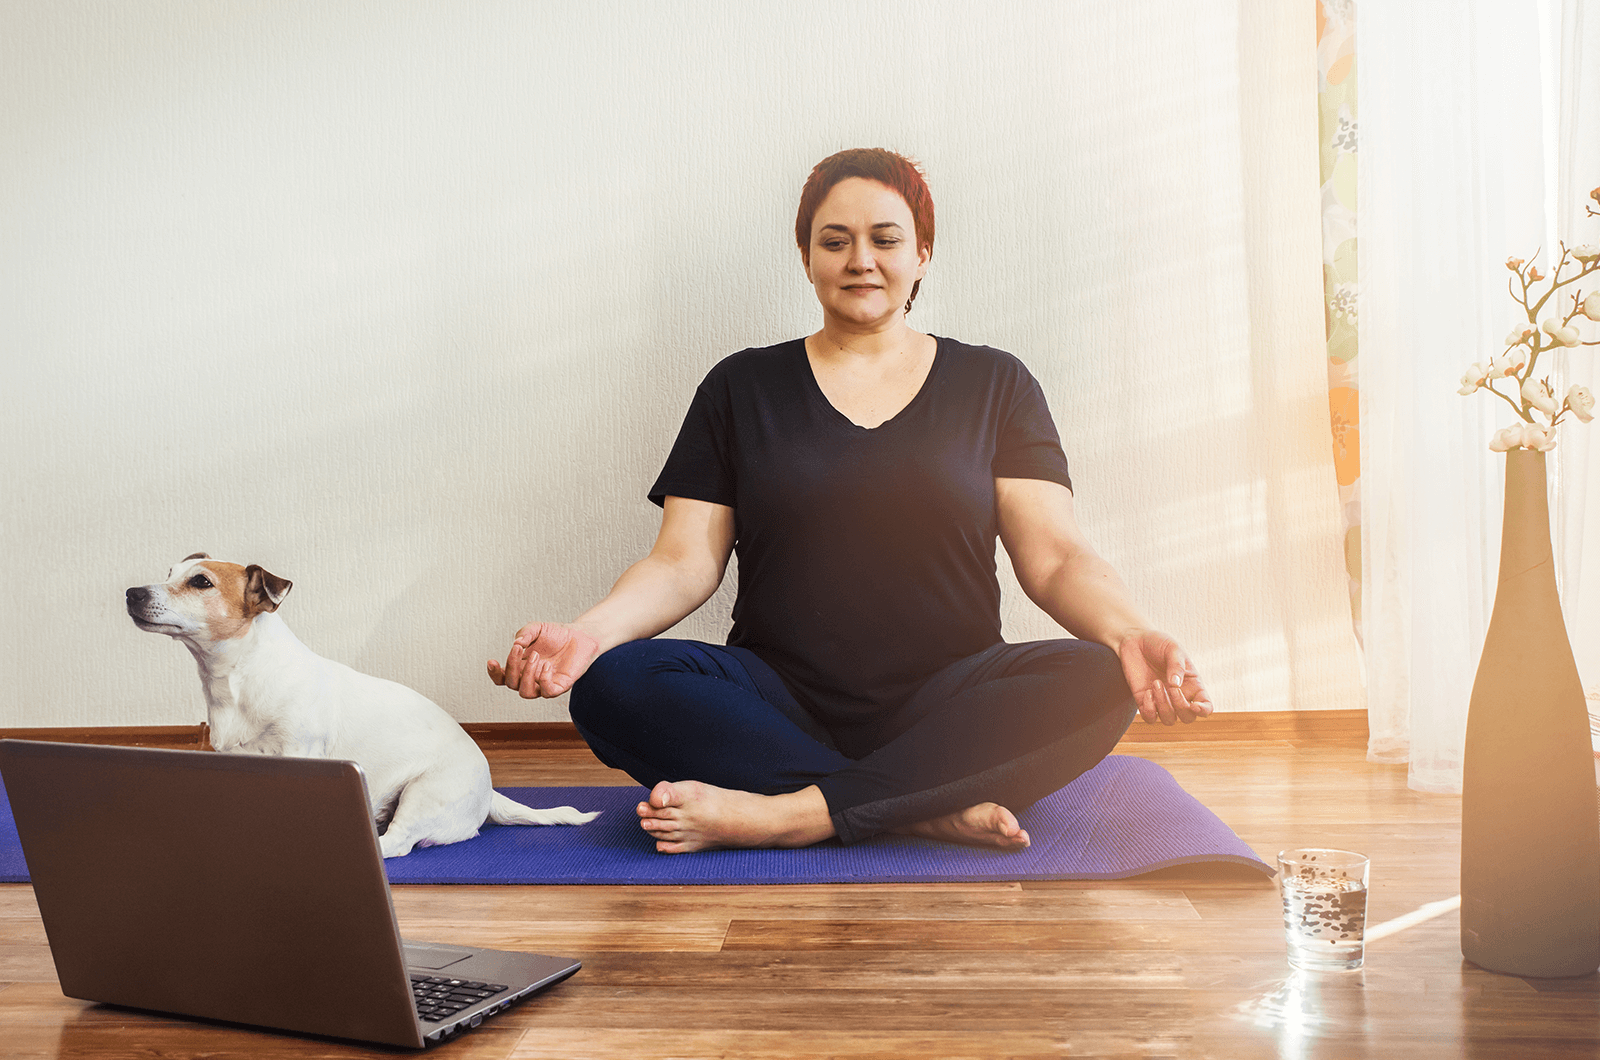 Woman watching laptop and posing on purple yoga mat with a dog